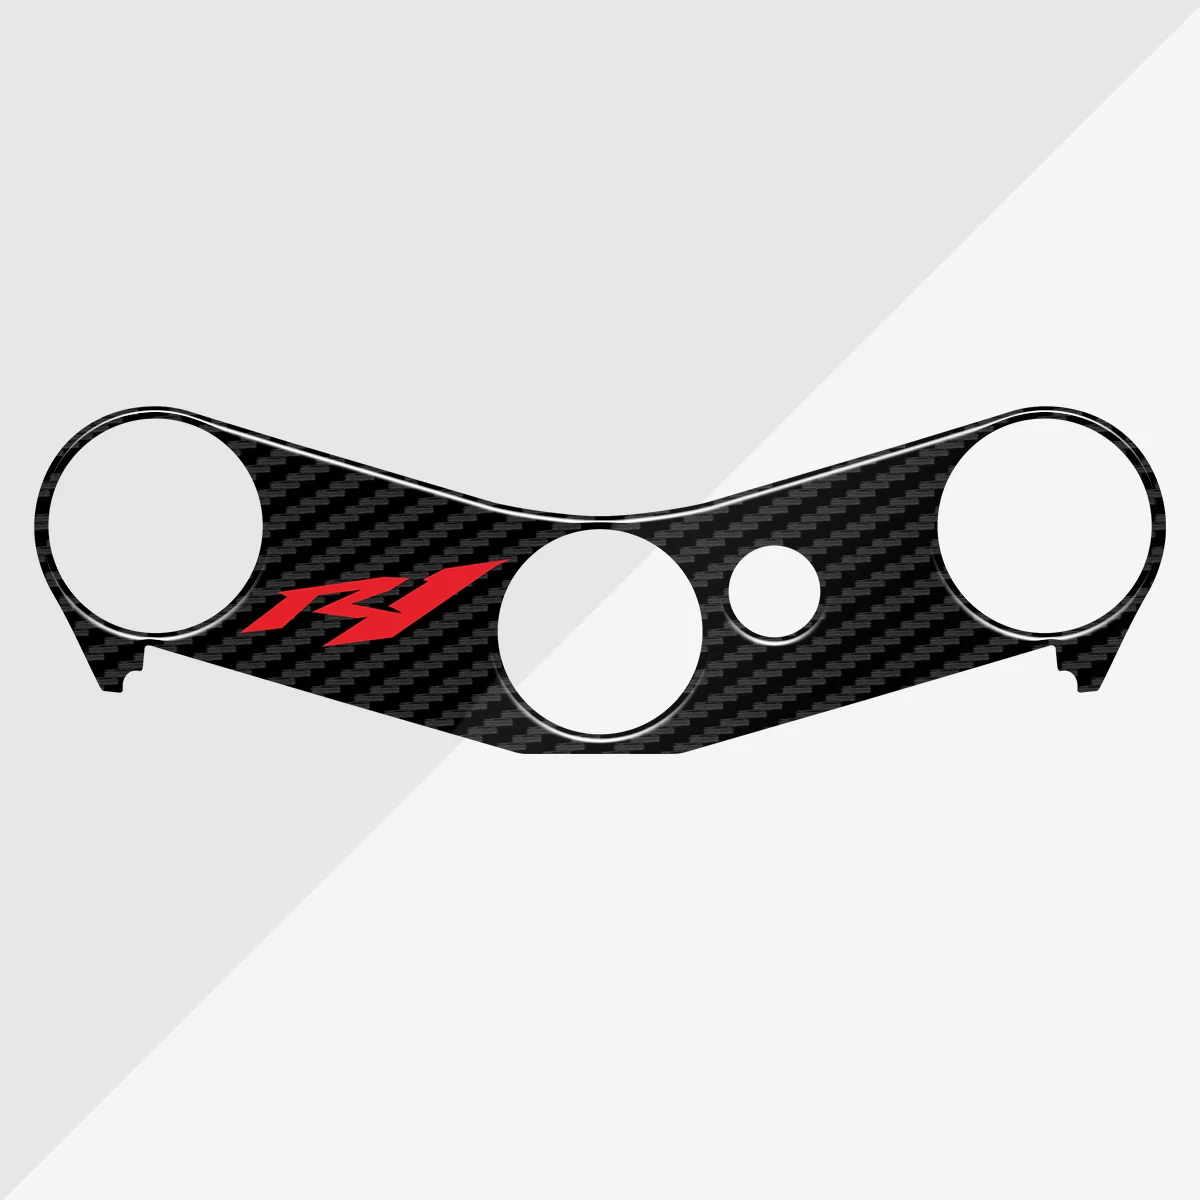 3D Resin Motorcycle Carbon Fiber Stickers Top Triple Clamp Yoke Case for Yamaha YZF-R1 R1 R 1 2004 2005 2006